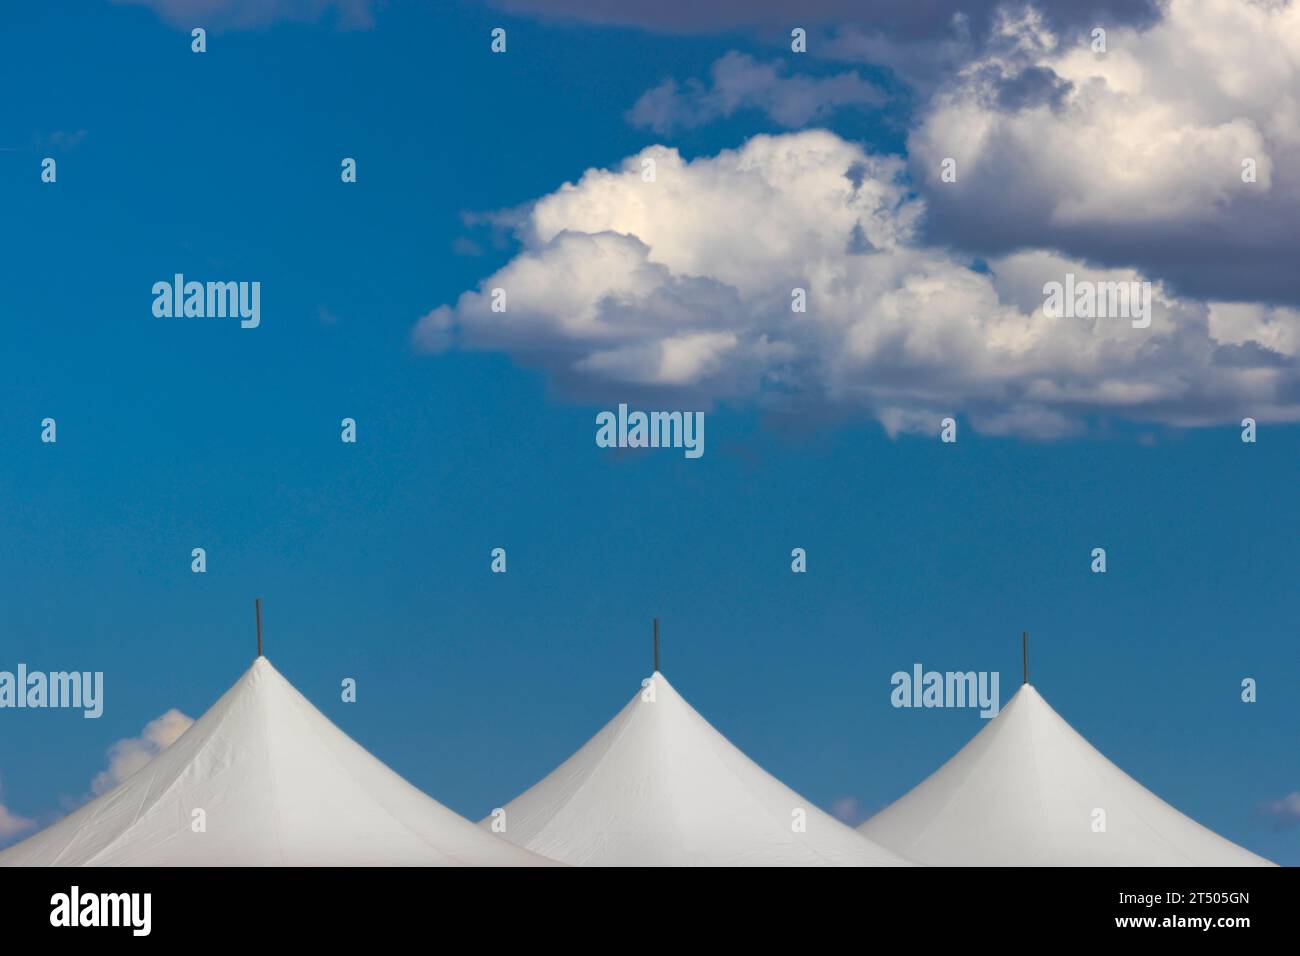 White fluffly clouds in bright blue sky hoover over the tops of three white tents. Stock Photo